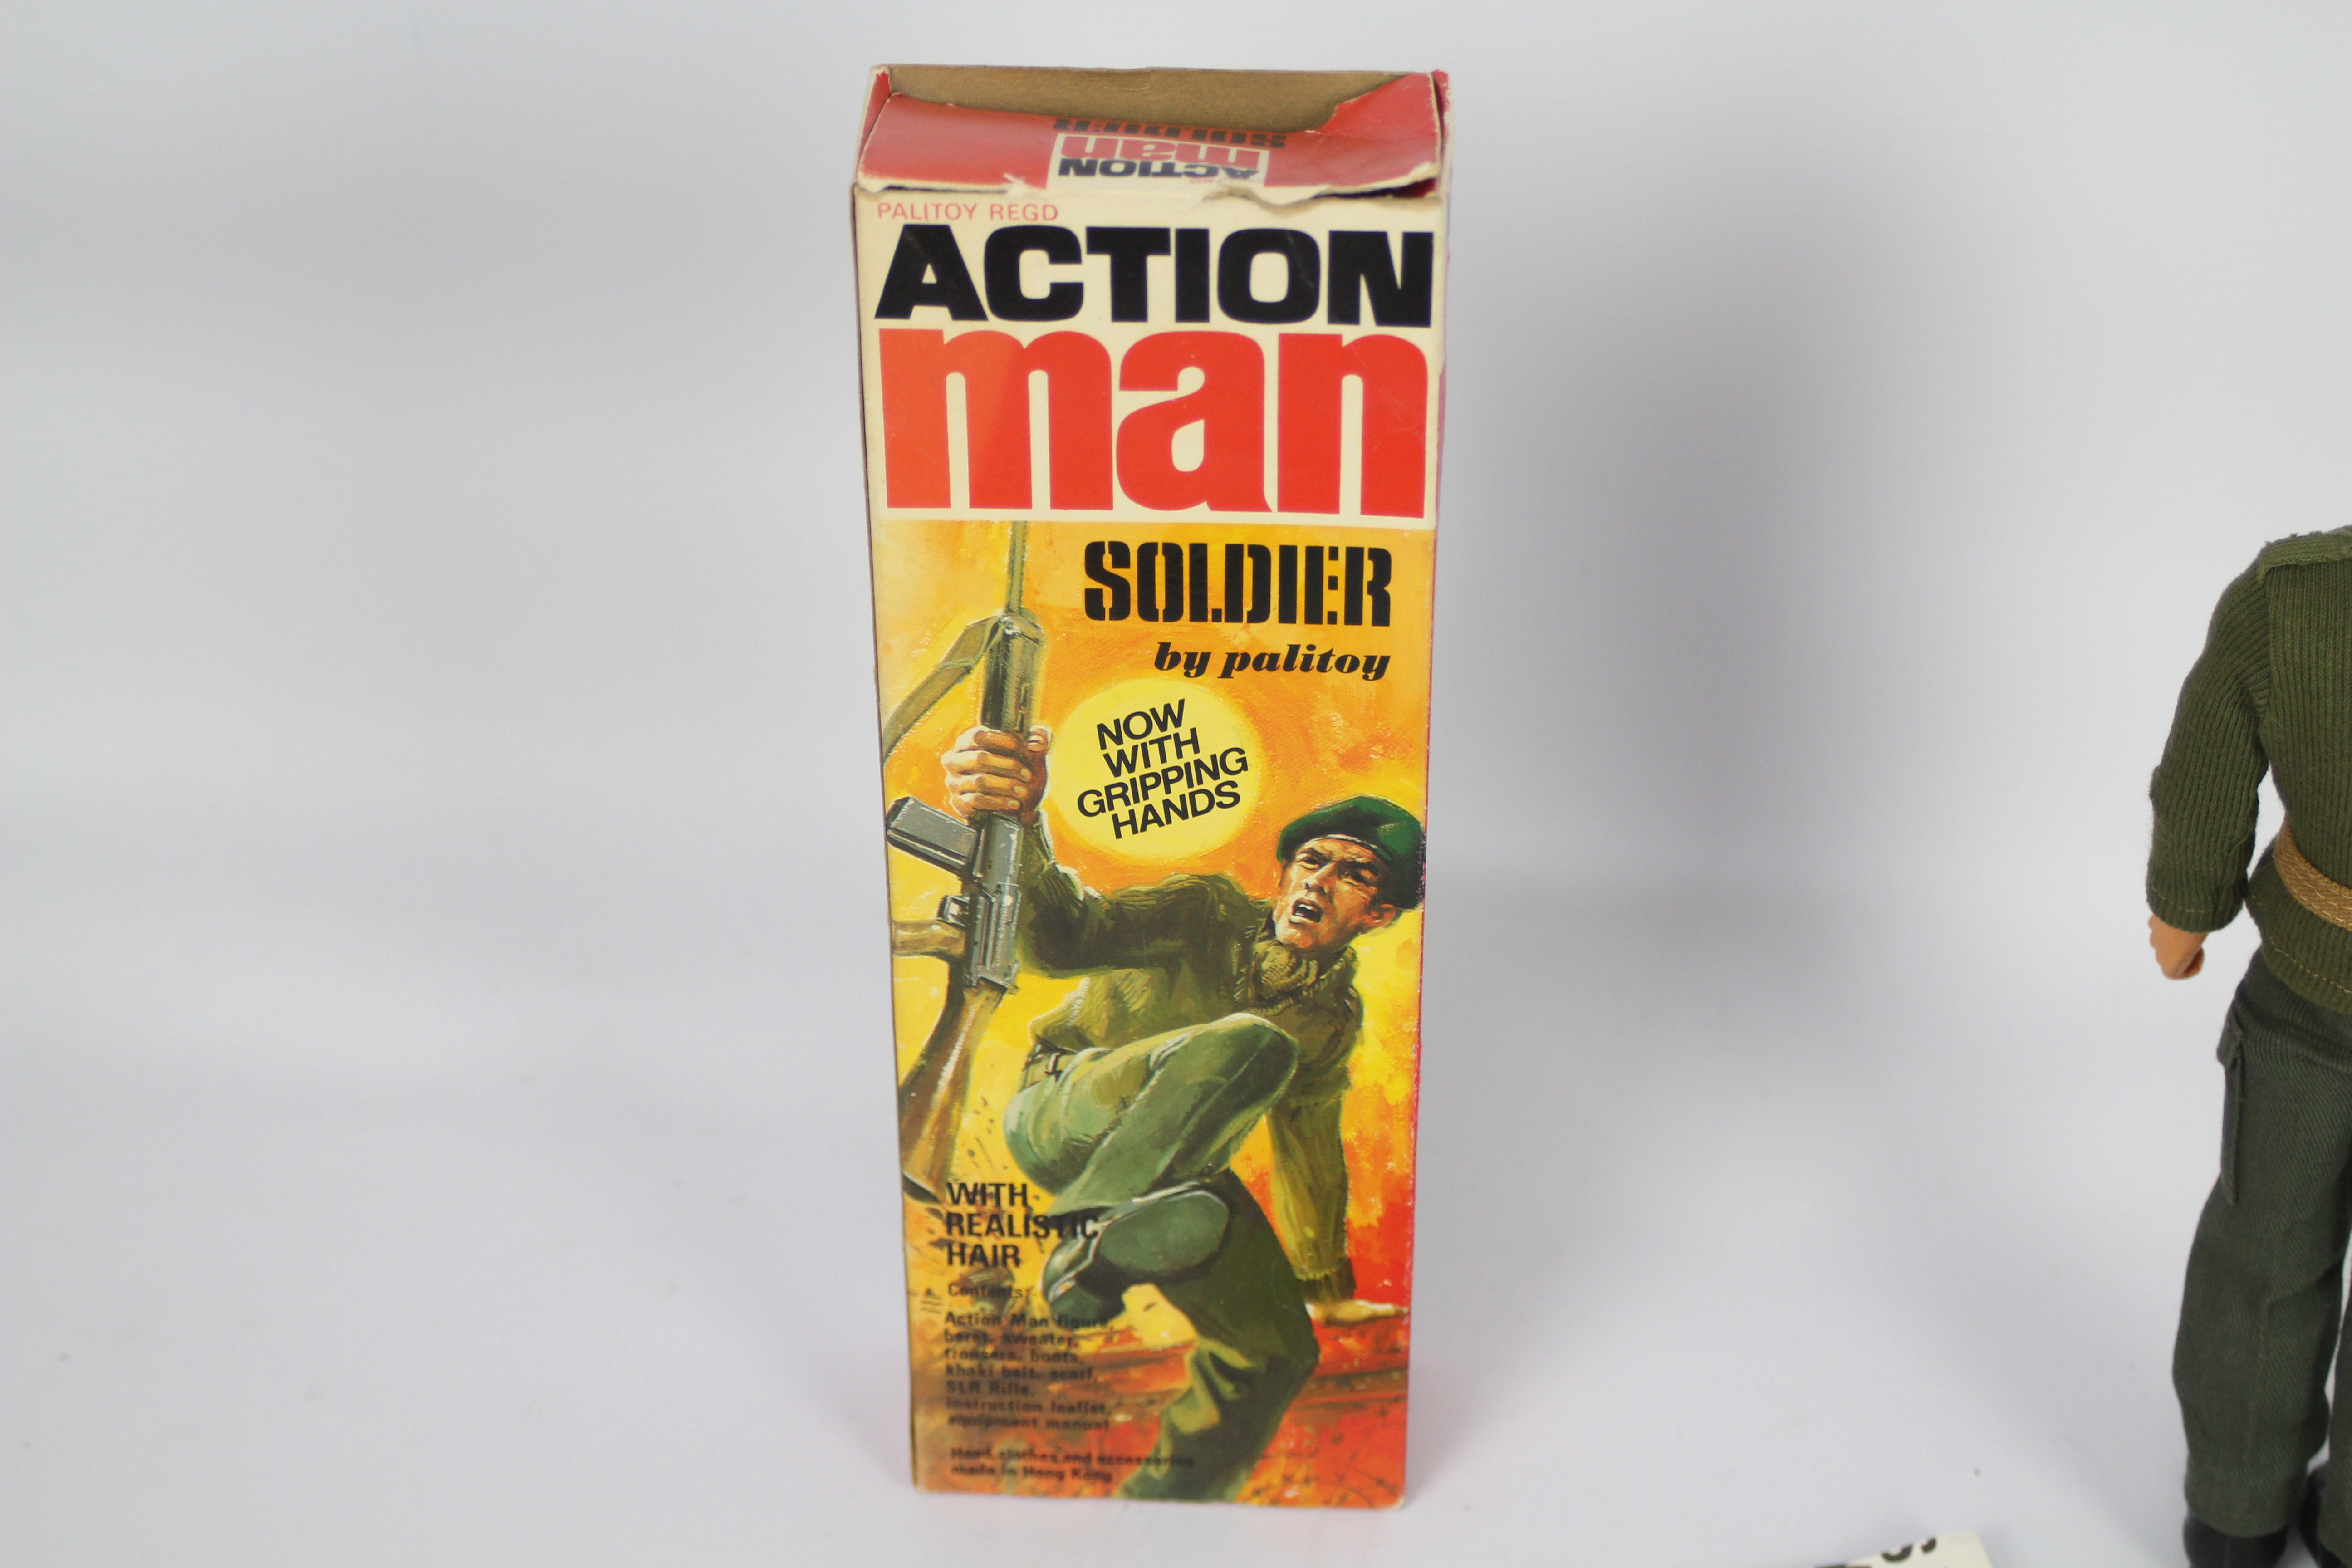 Palitoy Action Man - A boxed vintage Action Man Soldier with Gripping Hands. - Image 8 of 8